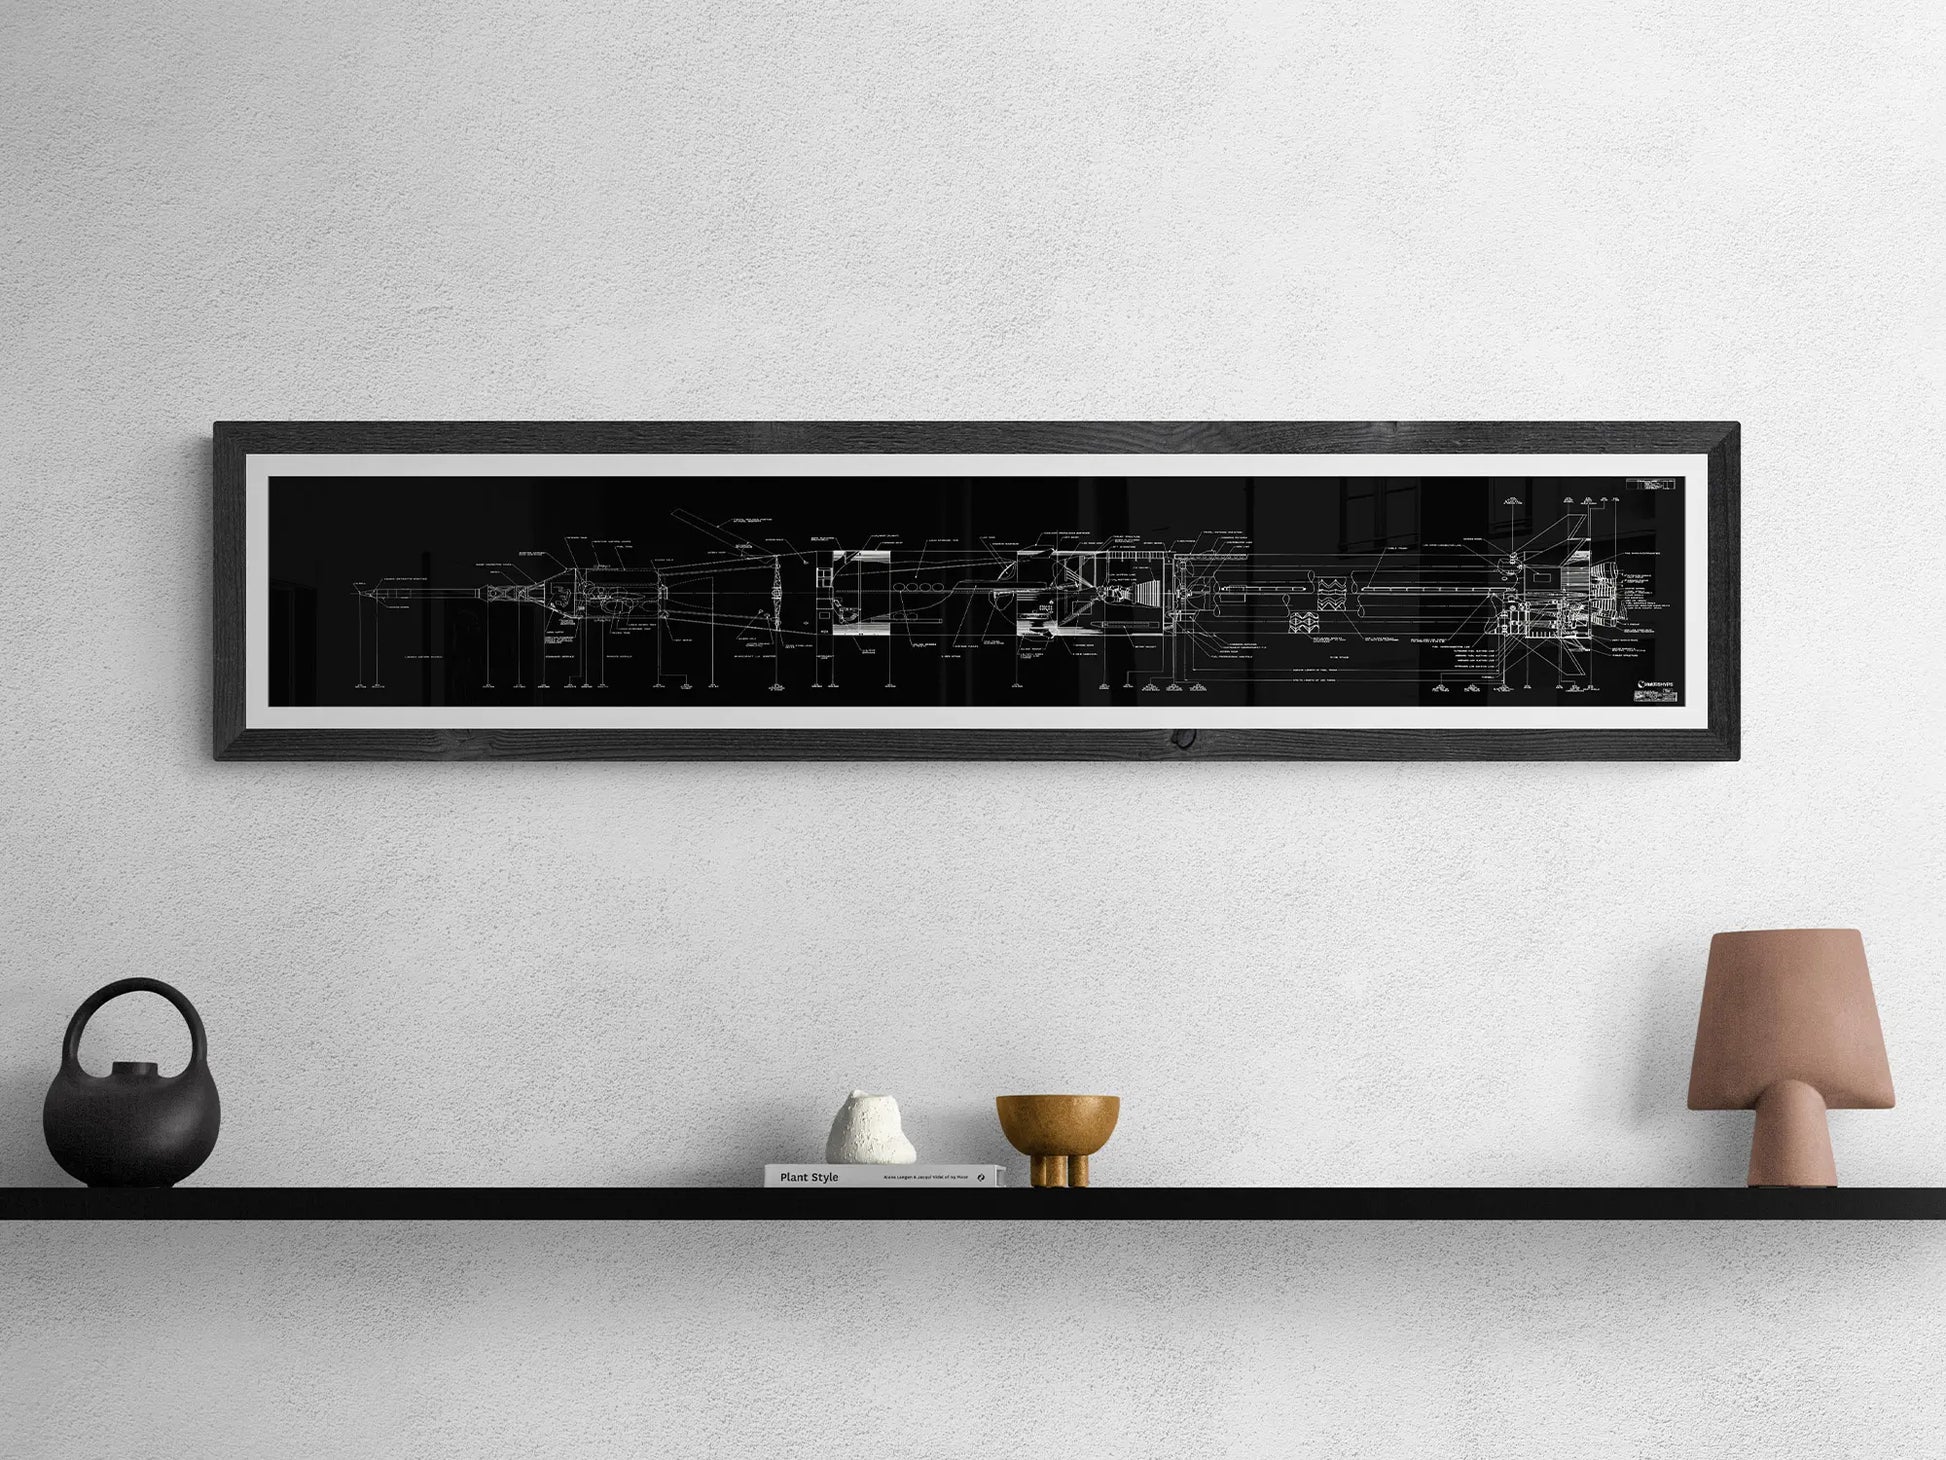 Apollo Saturn Blueprint | NASA posters | Technical blueprint diagram of an spacecraft | A framed black and white blueprint of the Saturn IB rocket hangs on a light gray wall above a black shelf. The shelf holds a round black teapot, a small white sculpture, a gold-colored bowl, and a small, brown lamp.